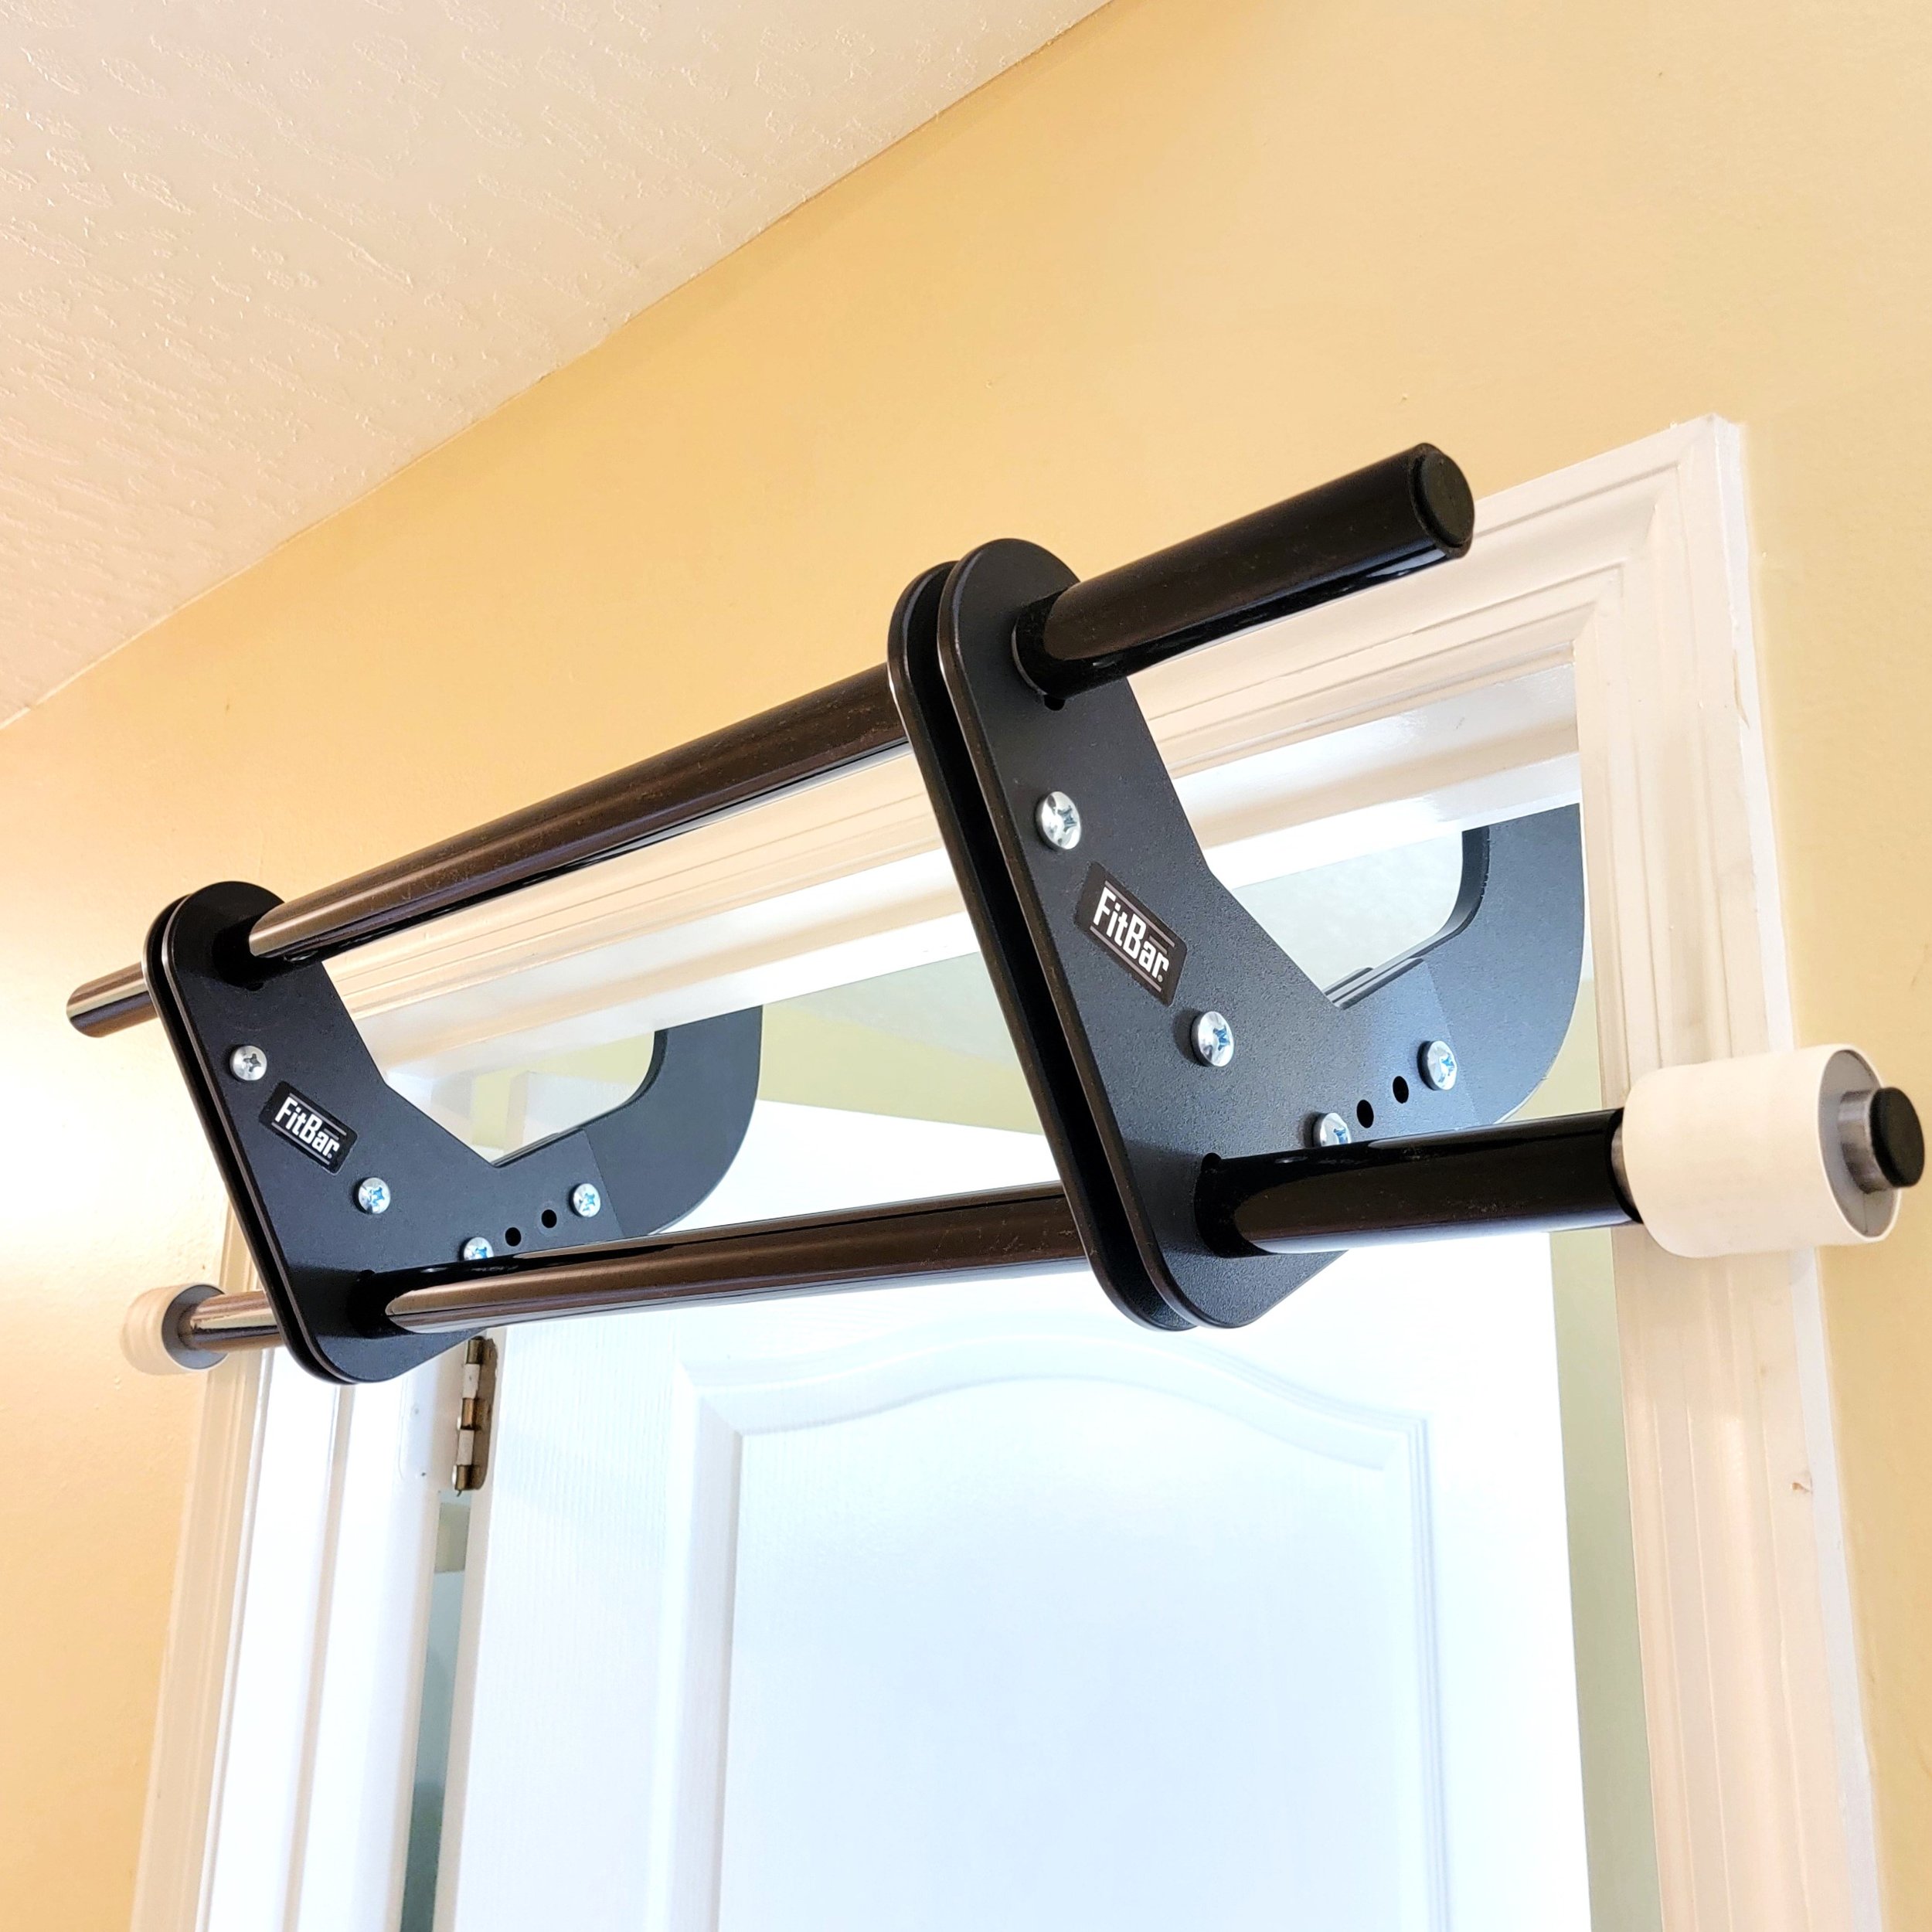 Doorway Pull Up Bar - FitBar Grip, Obstacle, Strength Equipment